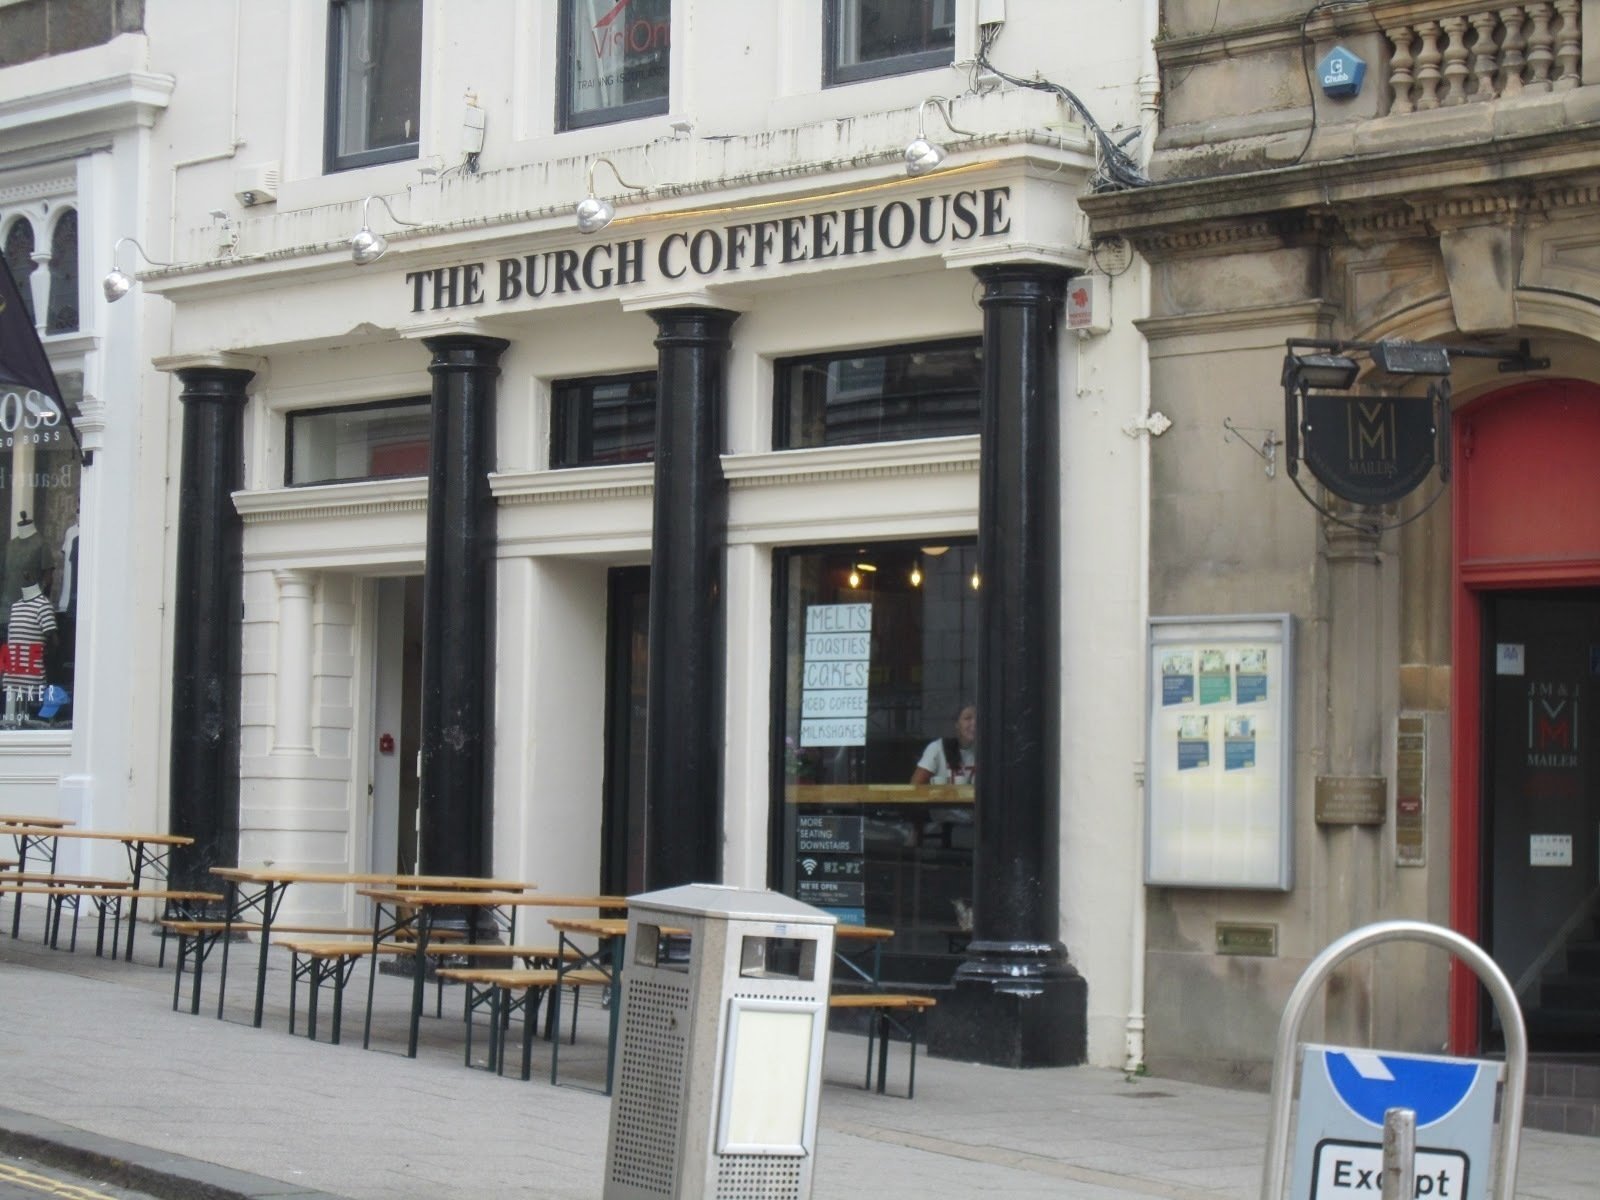 <span class="translation_missing" title="translation missing: en.meta.location_title, location_name: The Burgh Coffeehouse, city: Stirling">Location Title</span>